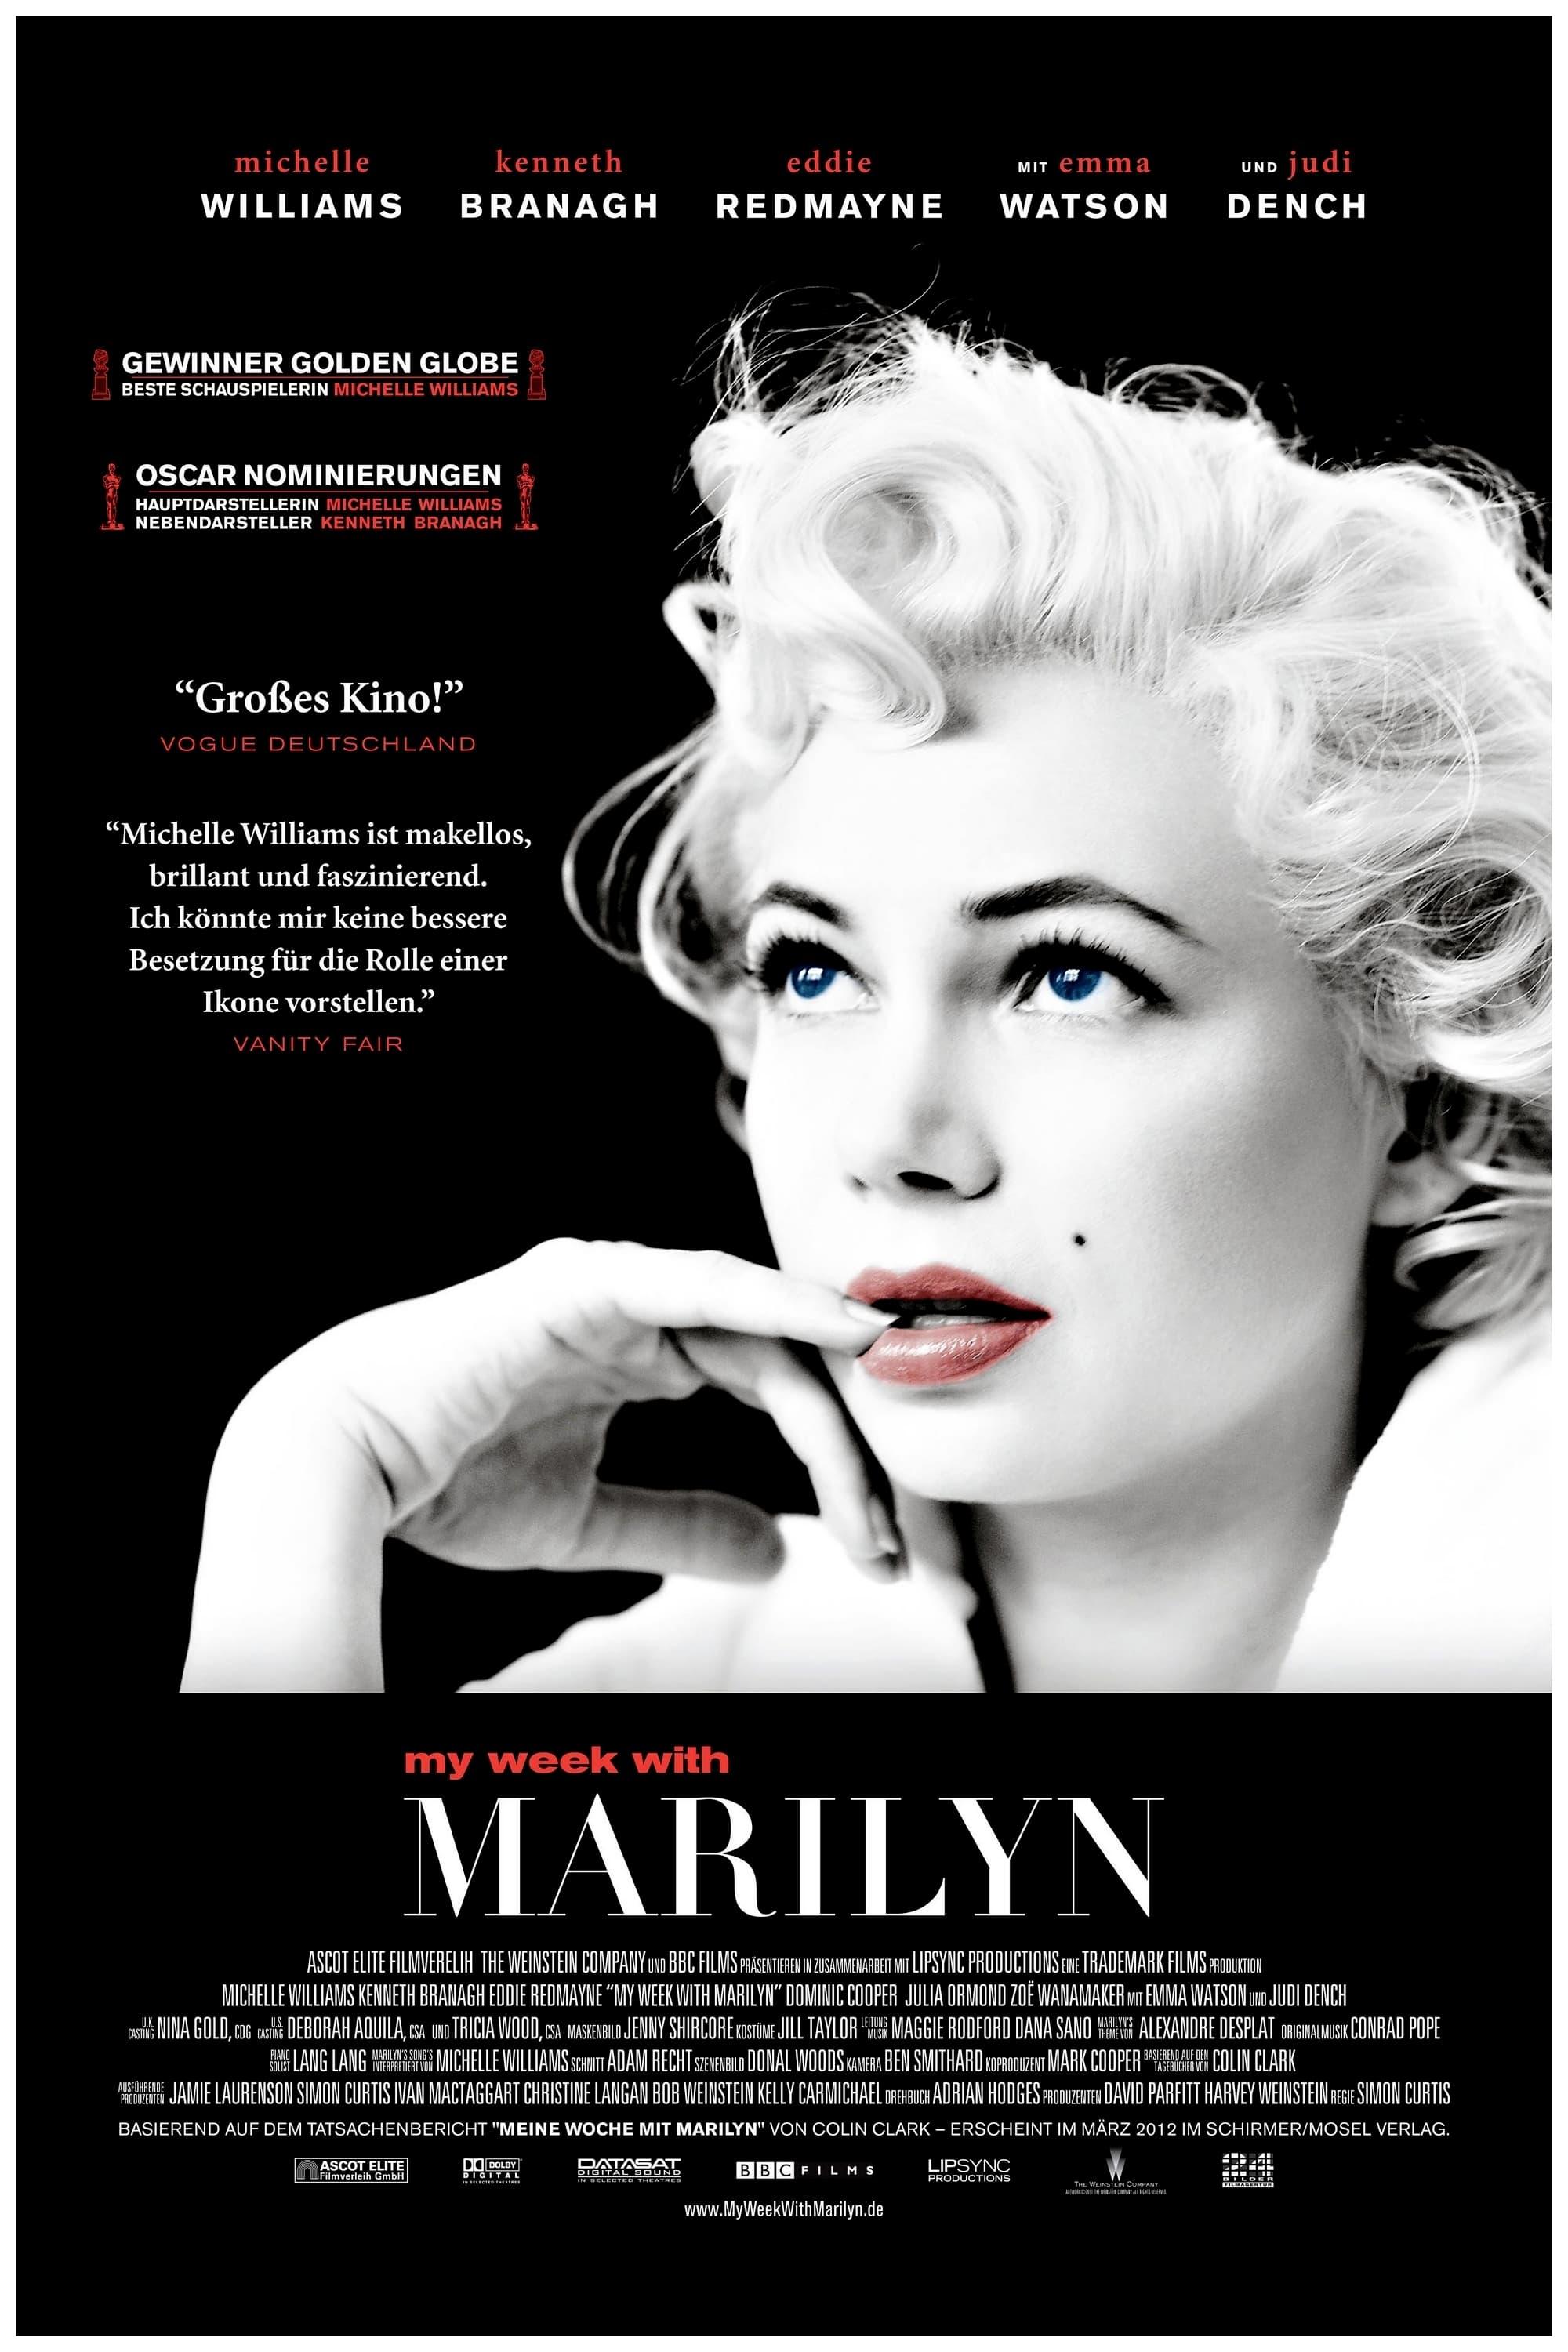 My Week with Marilyn poster